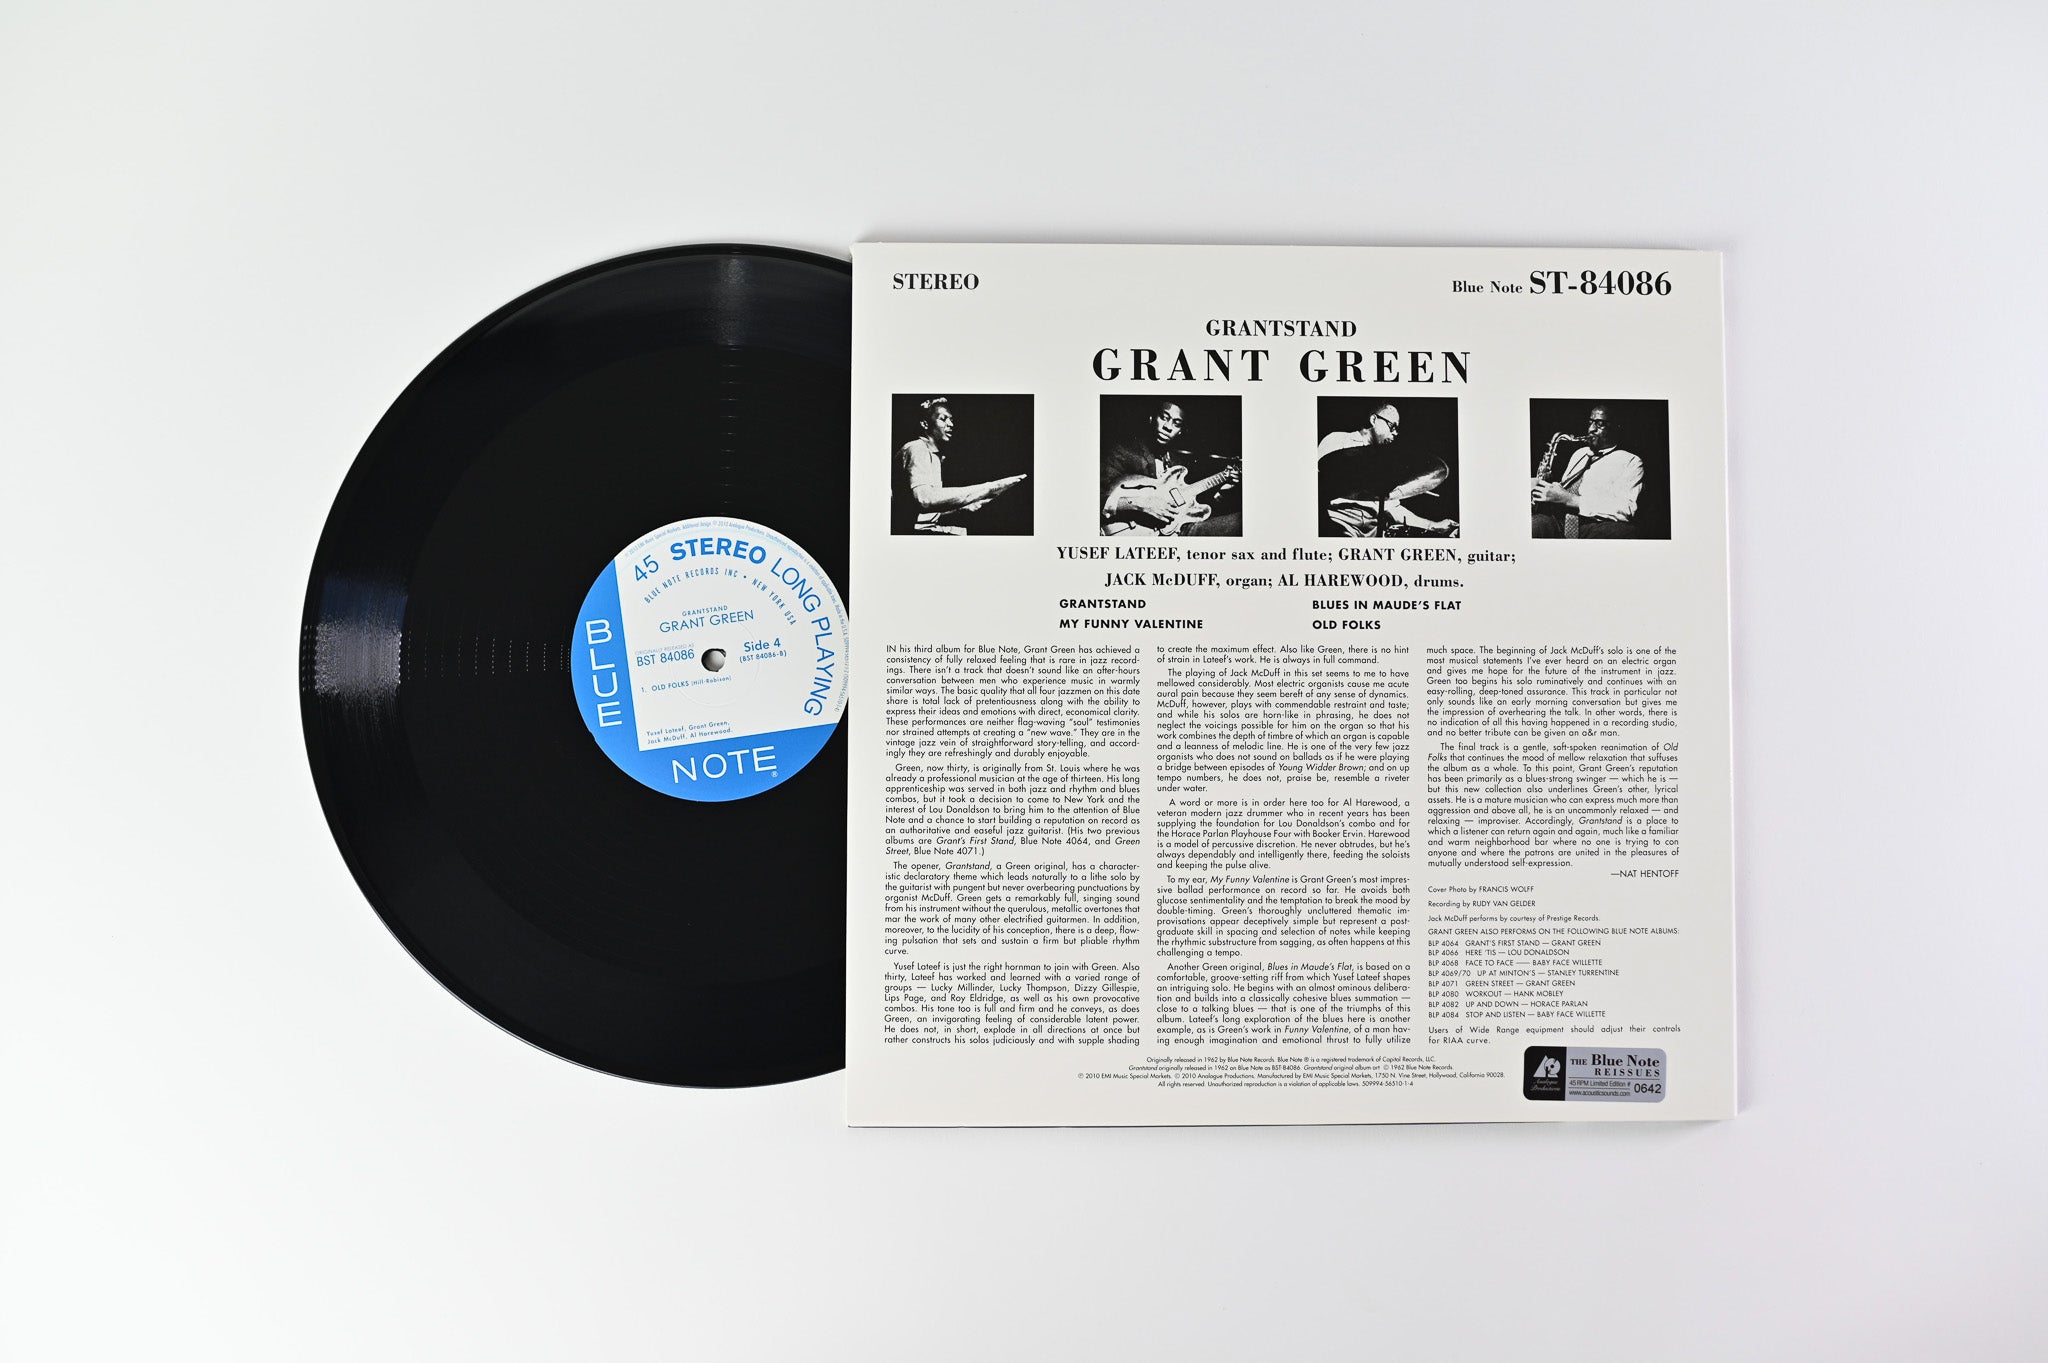 Grant Green - Grantstand on Blue Note Analogue Productions Reissue Numbered 45 RPM